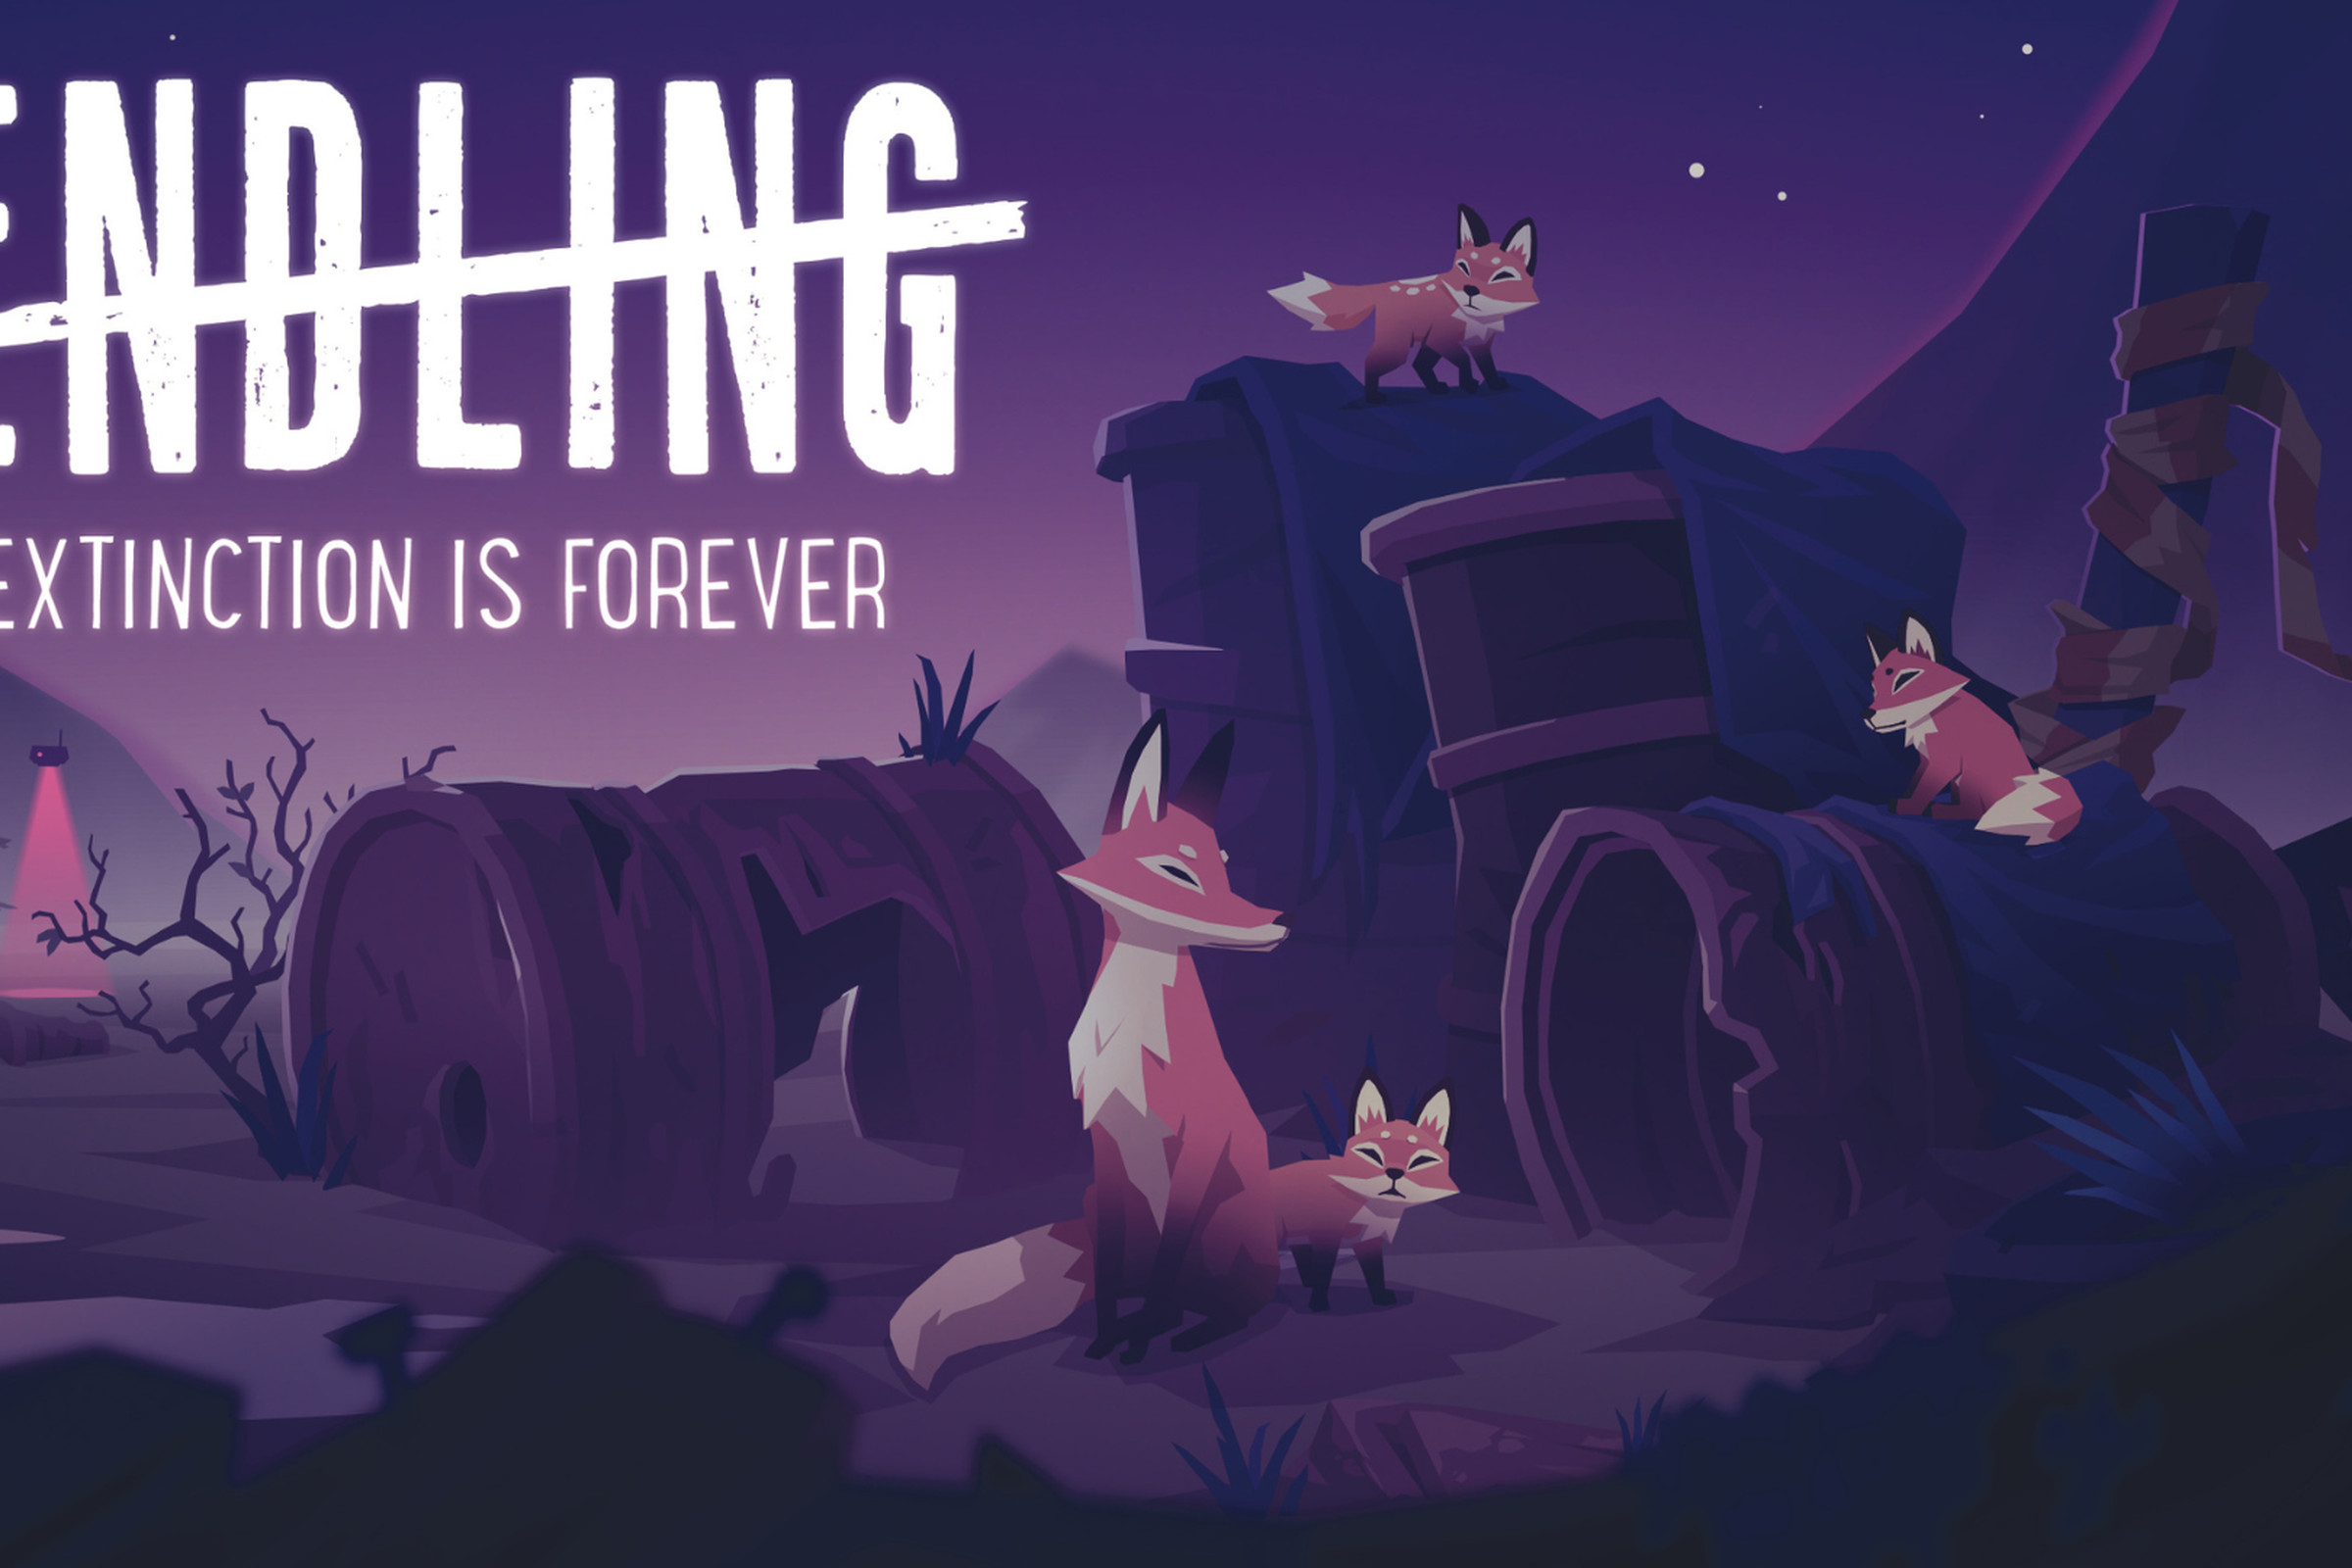 Art from Endling - Extinction is Forever featuring a family of foxes in a dark, trash strewn landscape with the title Endling - Extinction is Forever in white letters in the top left of the image.